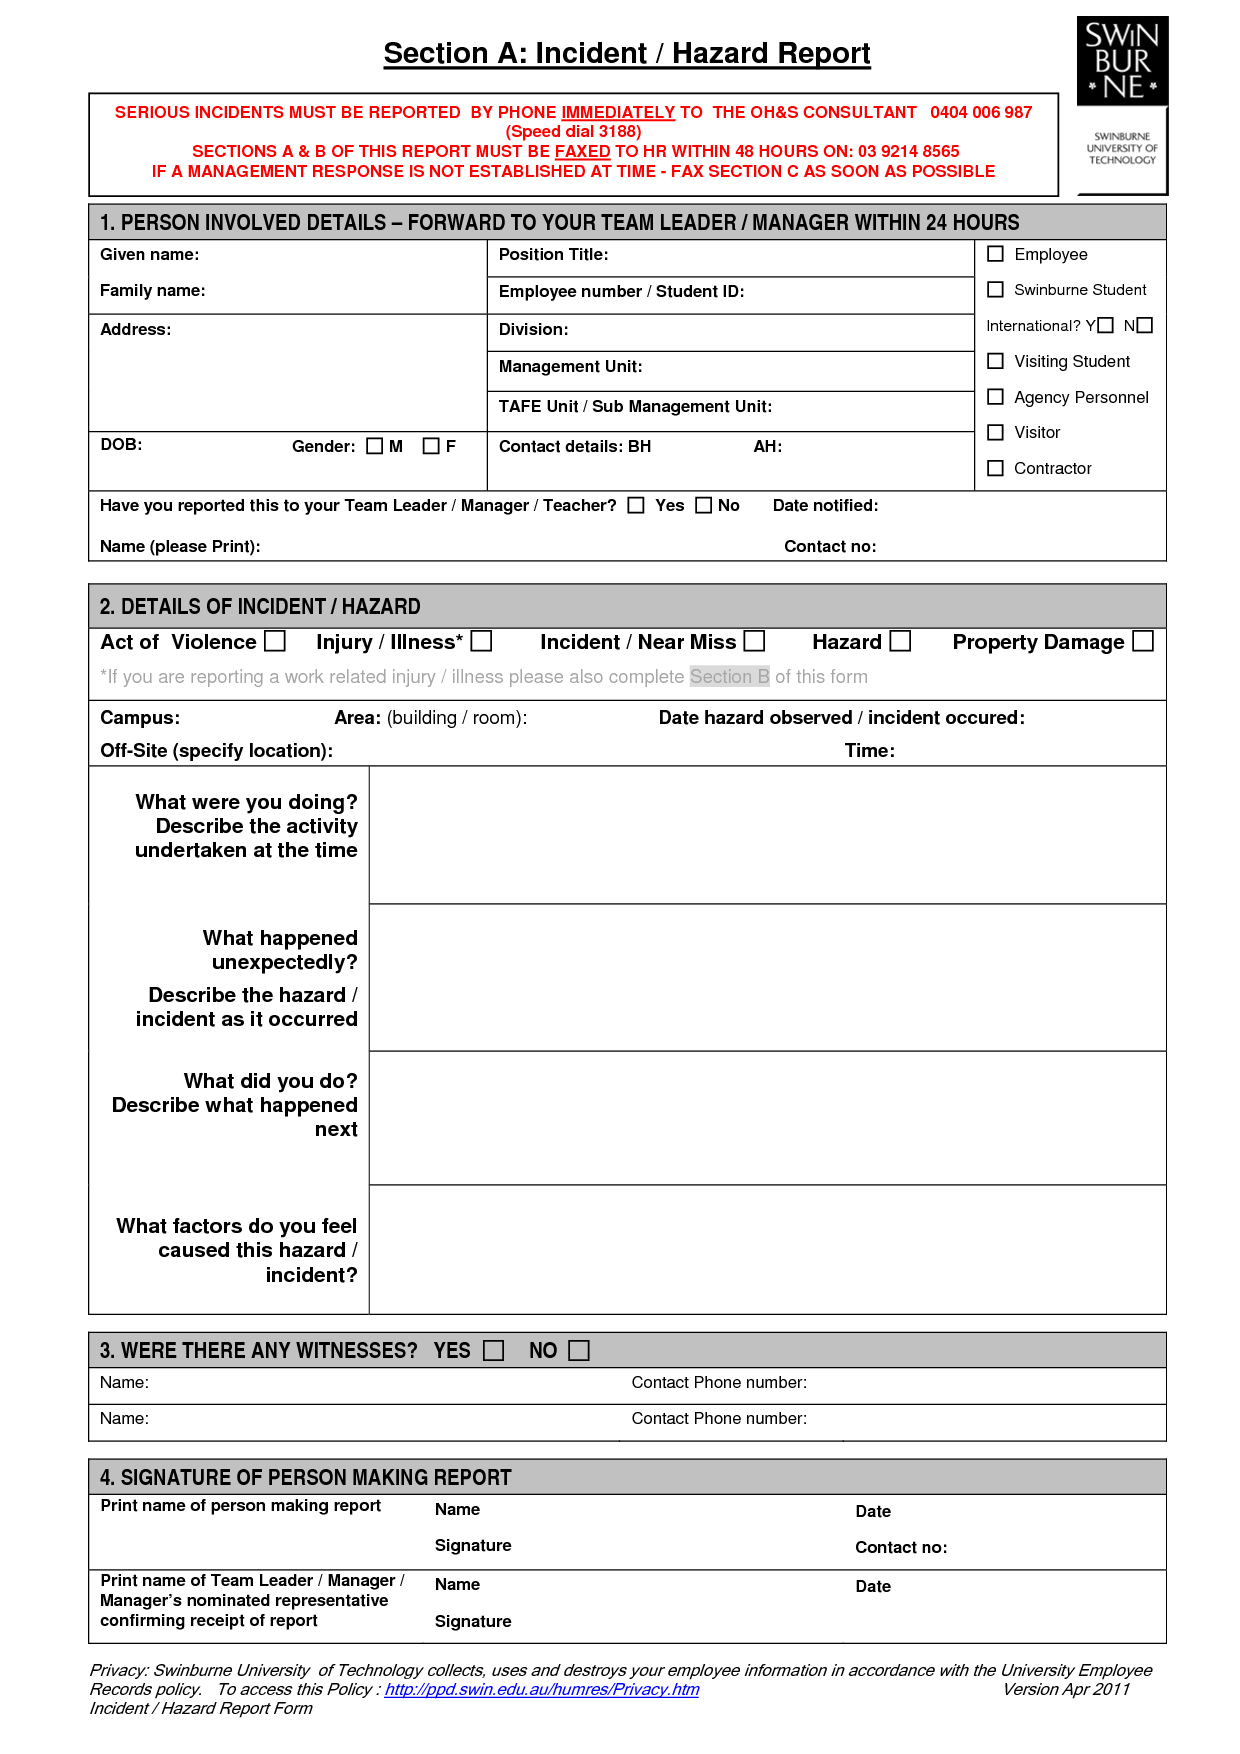 Technology Incident Report Template And Incident Report Pertaining To Incident Hazard Report Form Template